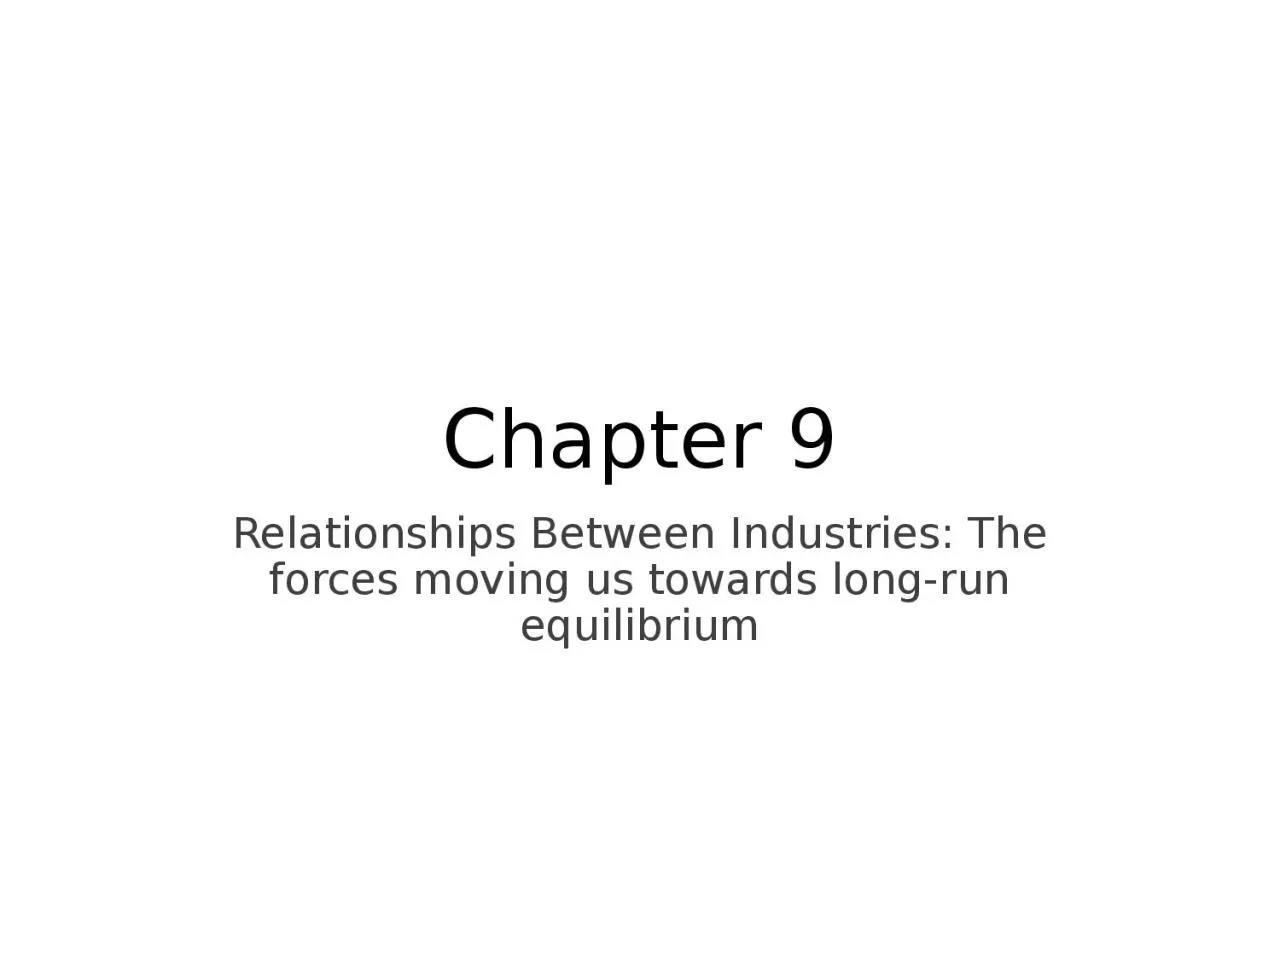 Chapter 9 Relationships Between Industries: The forces moving us towards long-run equilibrium